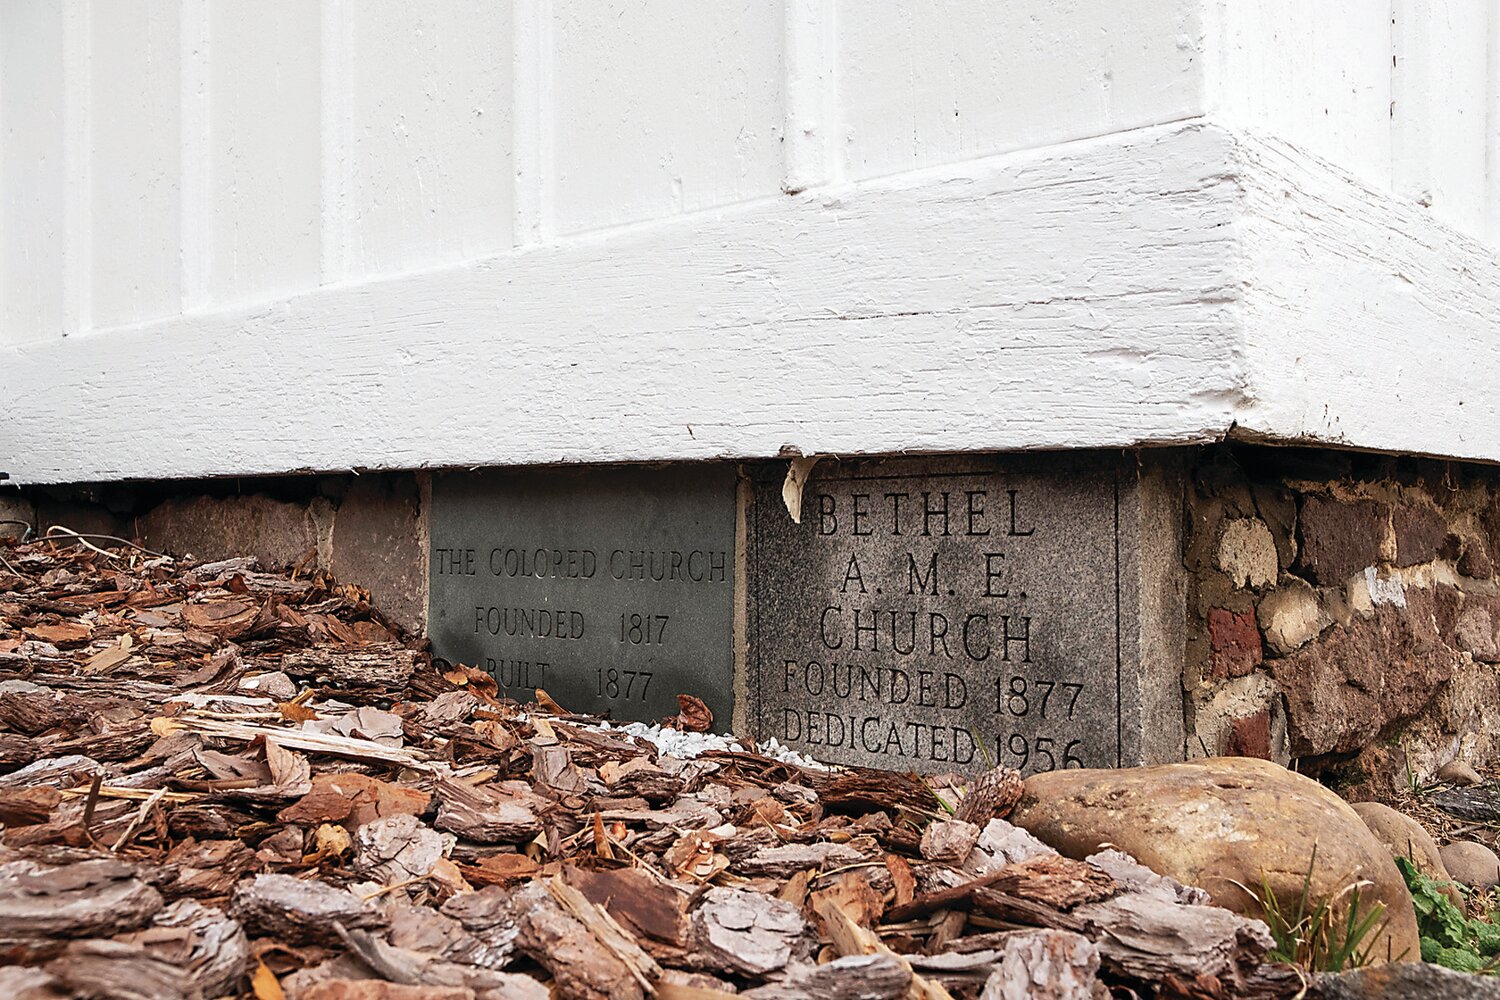 The etched cornerstone of Gather Place Museum, formerly the African Methodist Episcopal (A.M.E.) Church of Yardley.